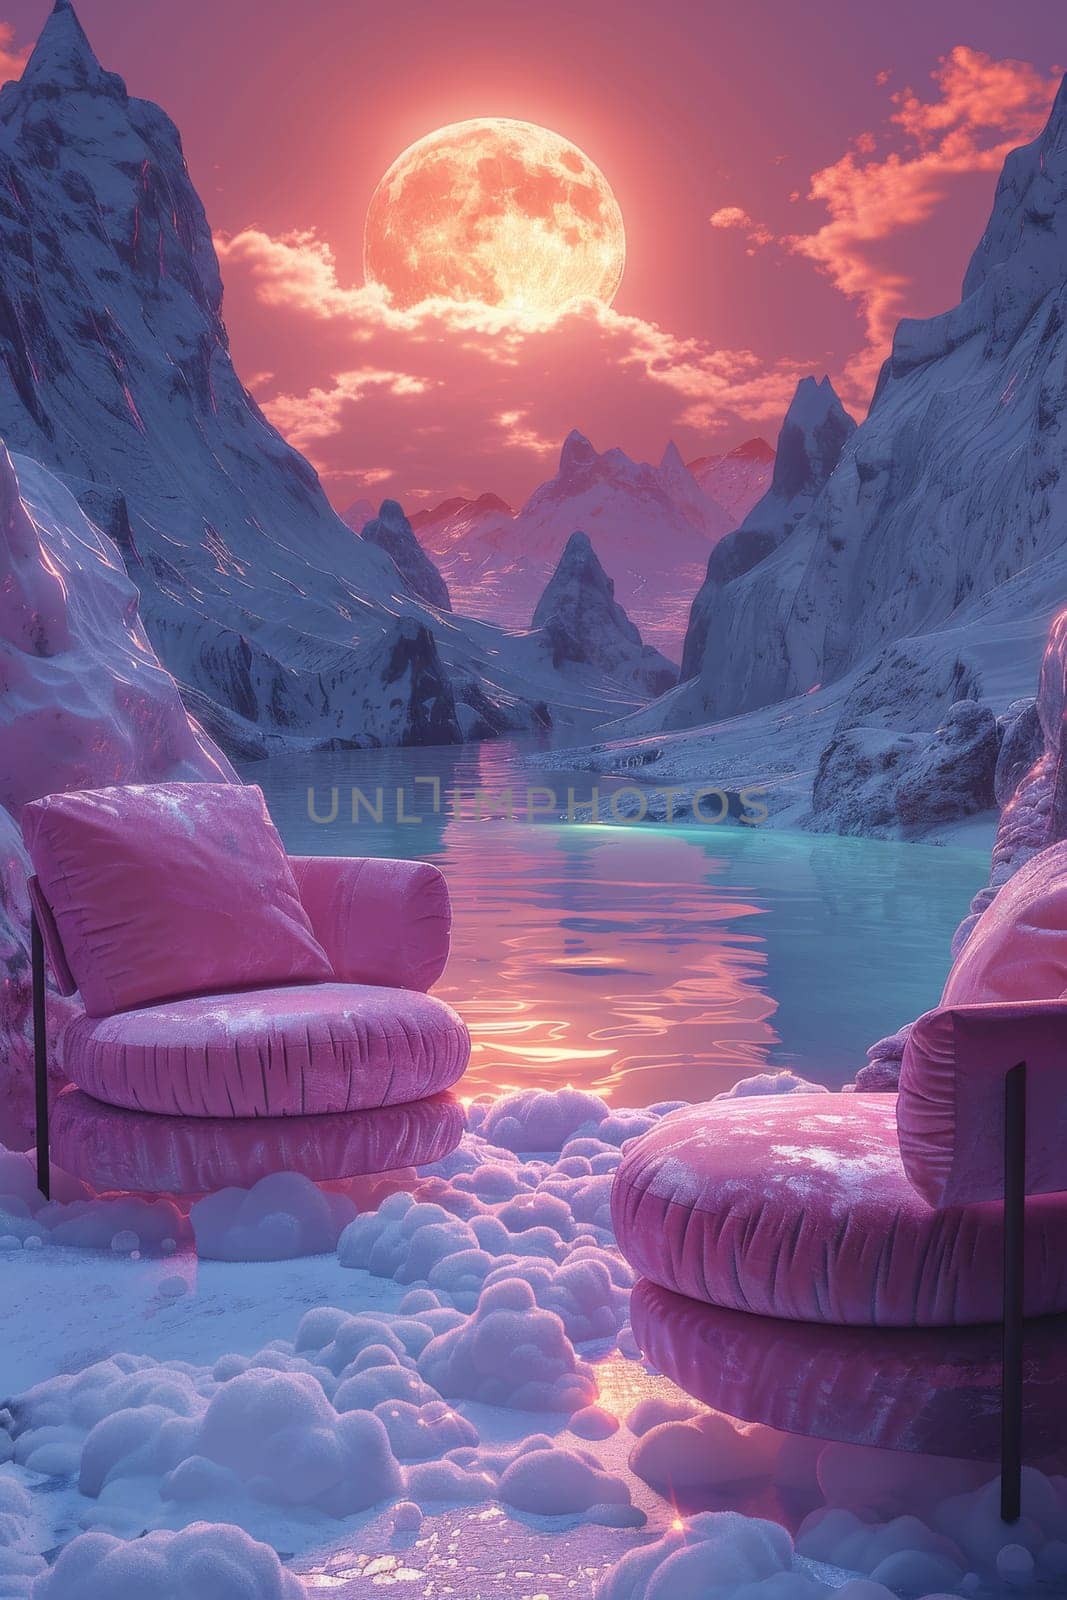 A pink couch is sitting on a table in a snowy mountain valley. The couch is surrounded by clouds and mountains, creating a serene and peaceful atmosphere